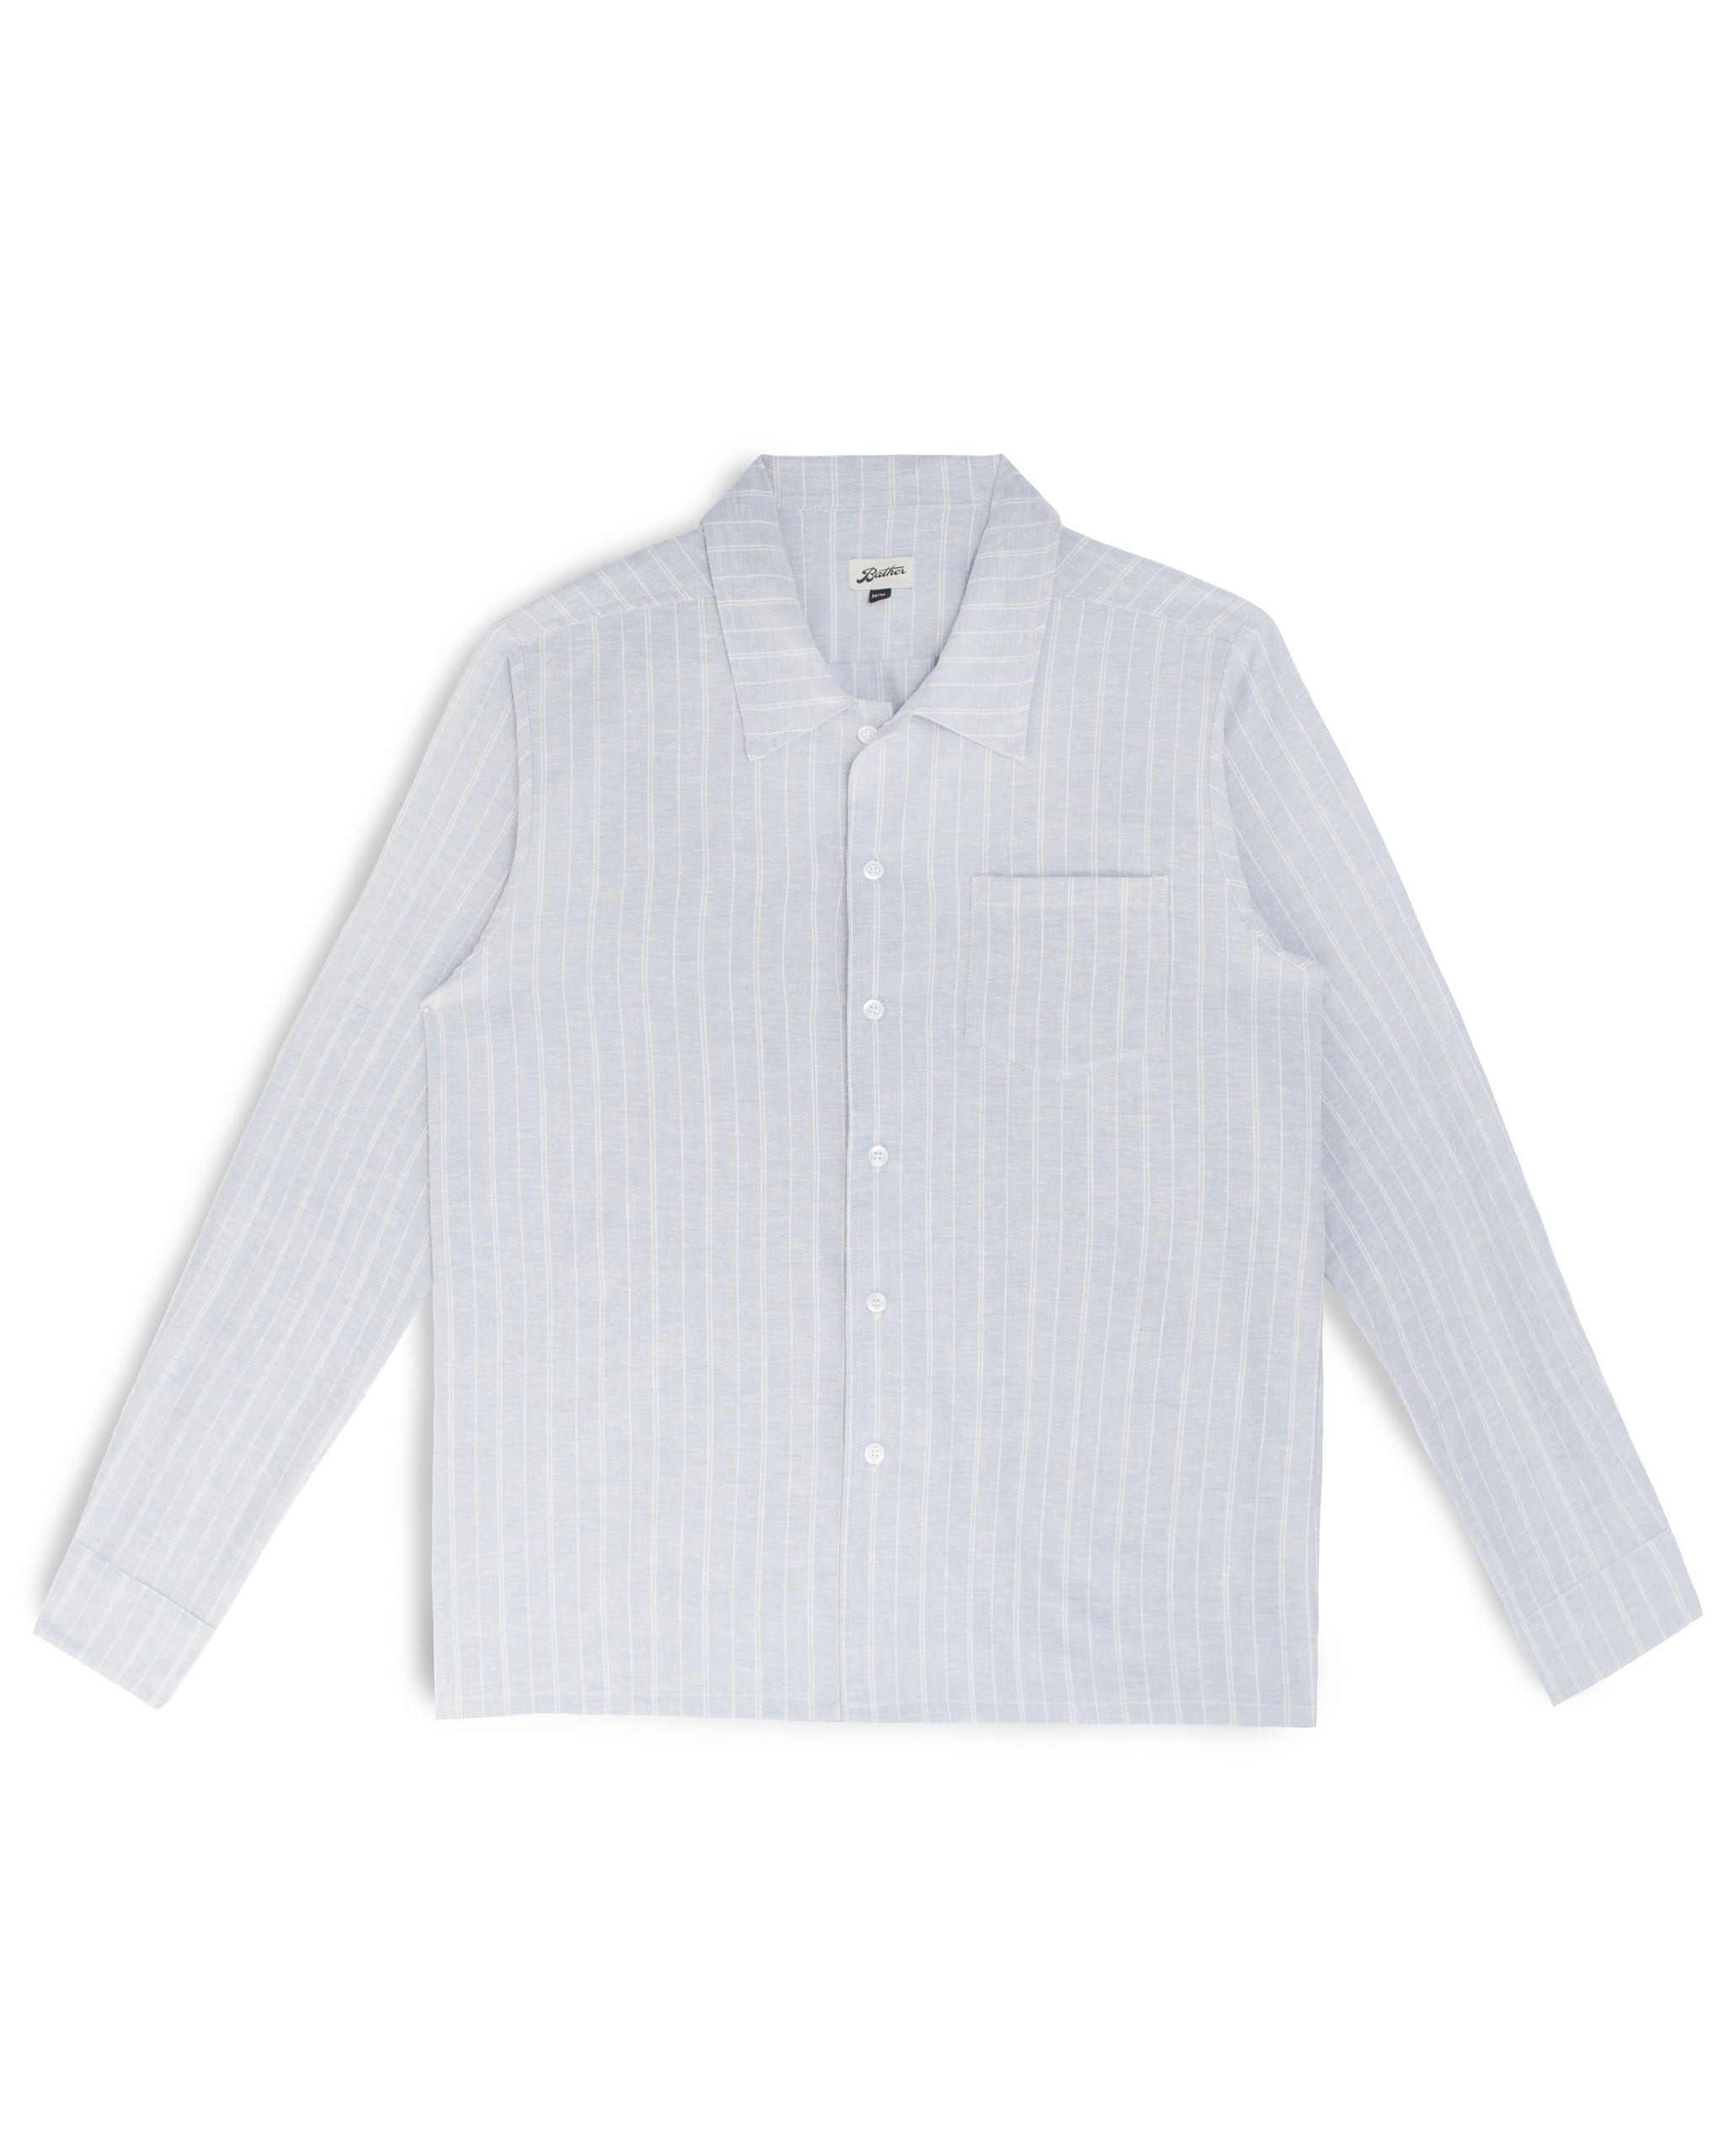 light blue Bather long sleeve button up shirt with white stripes